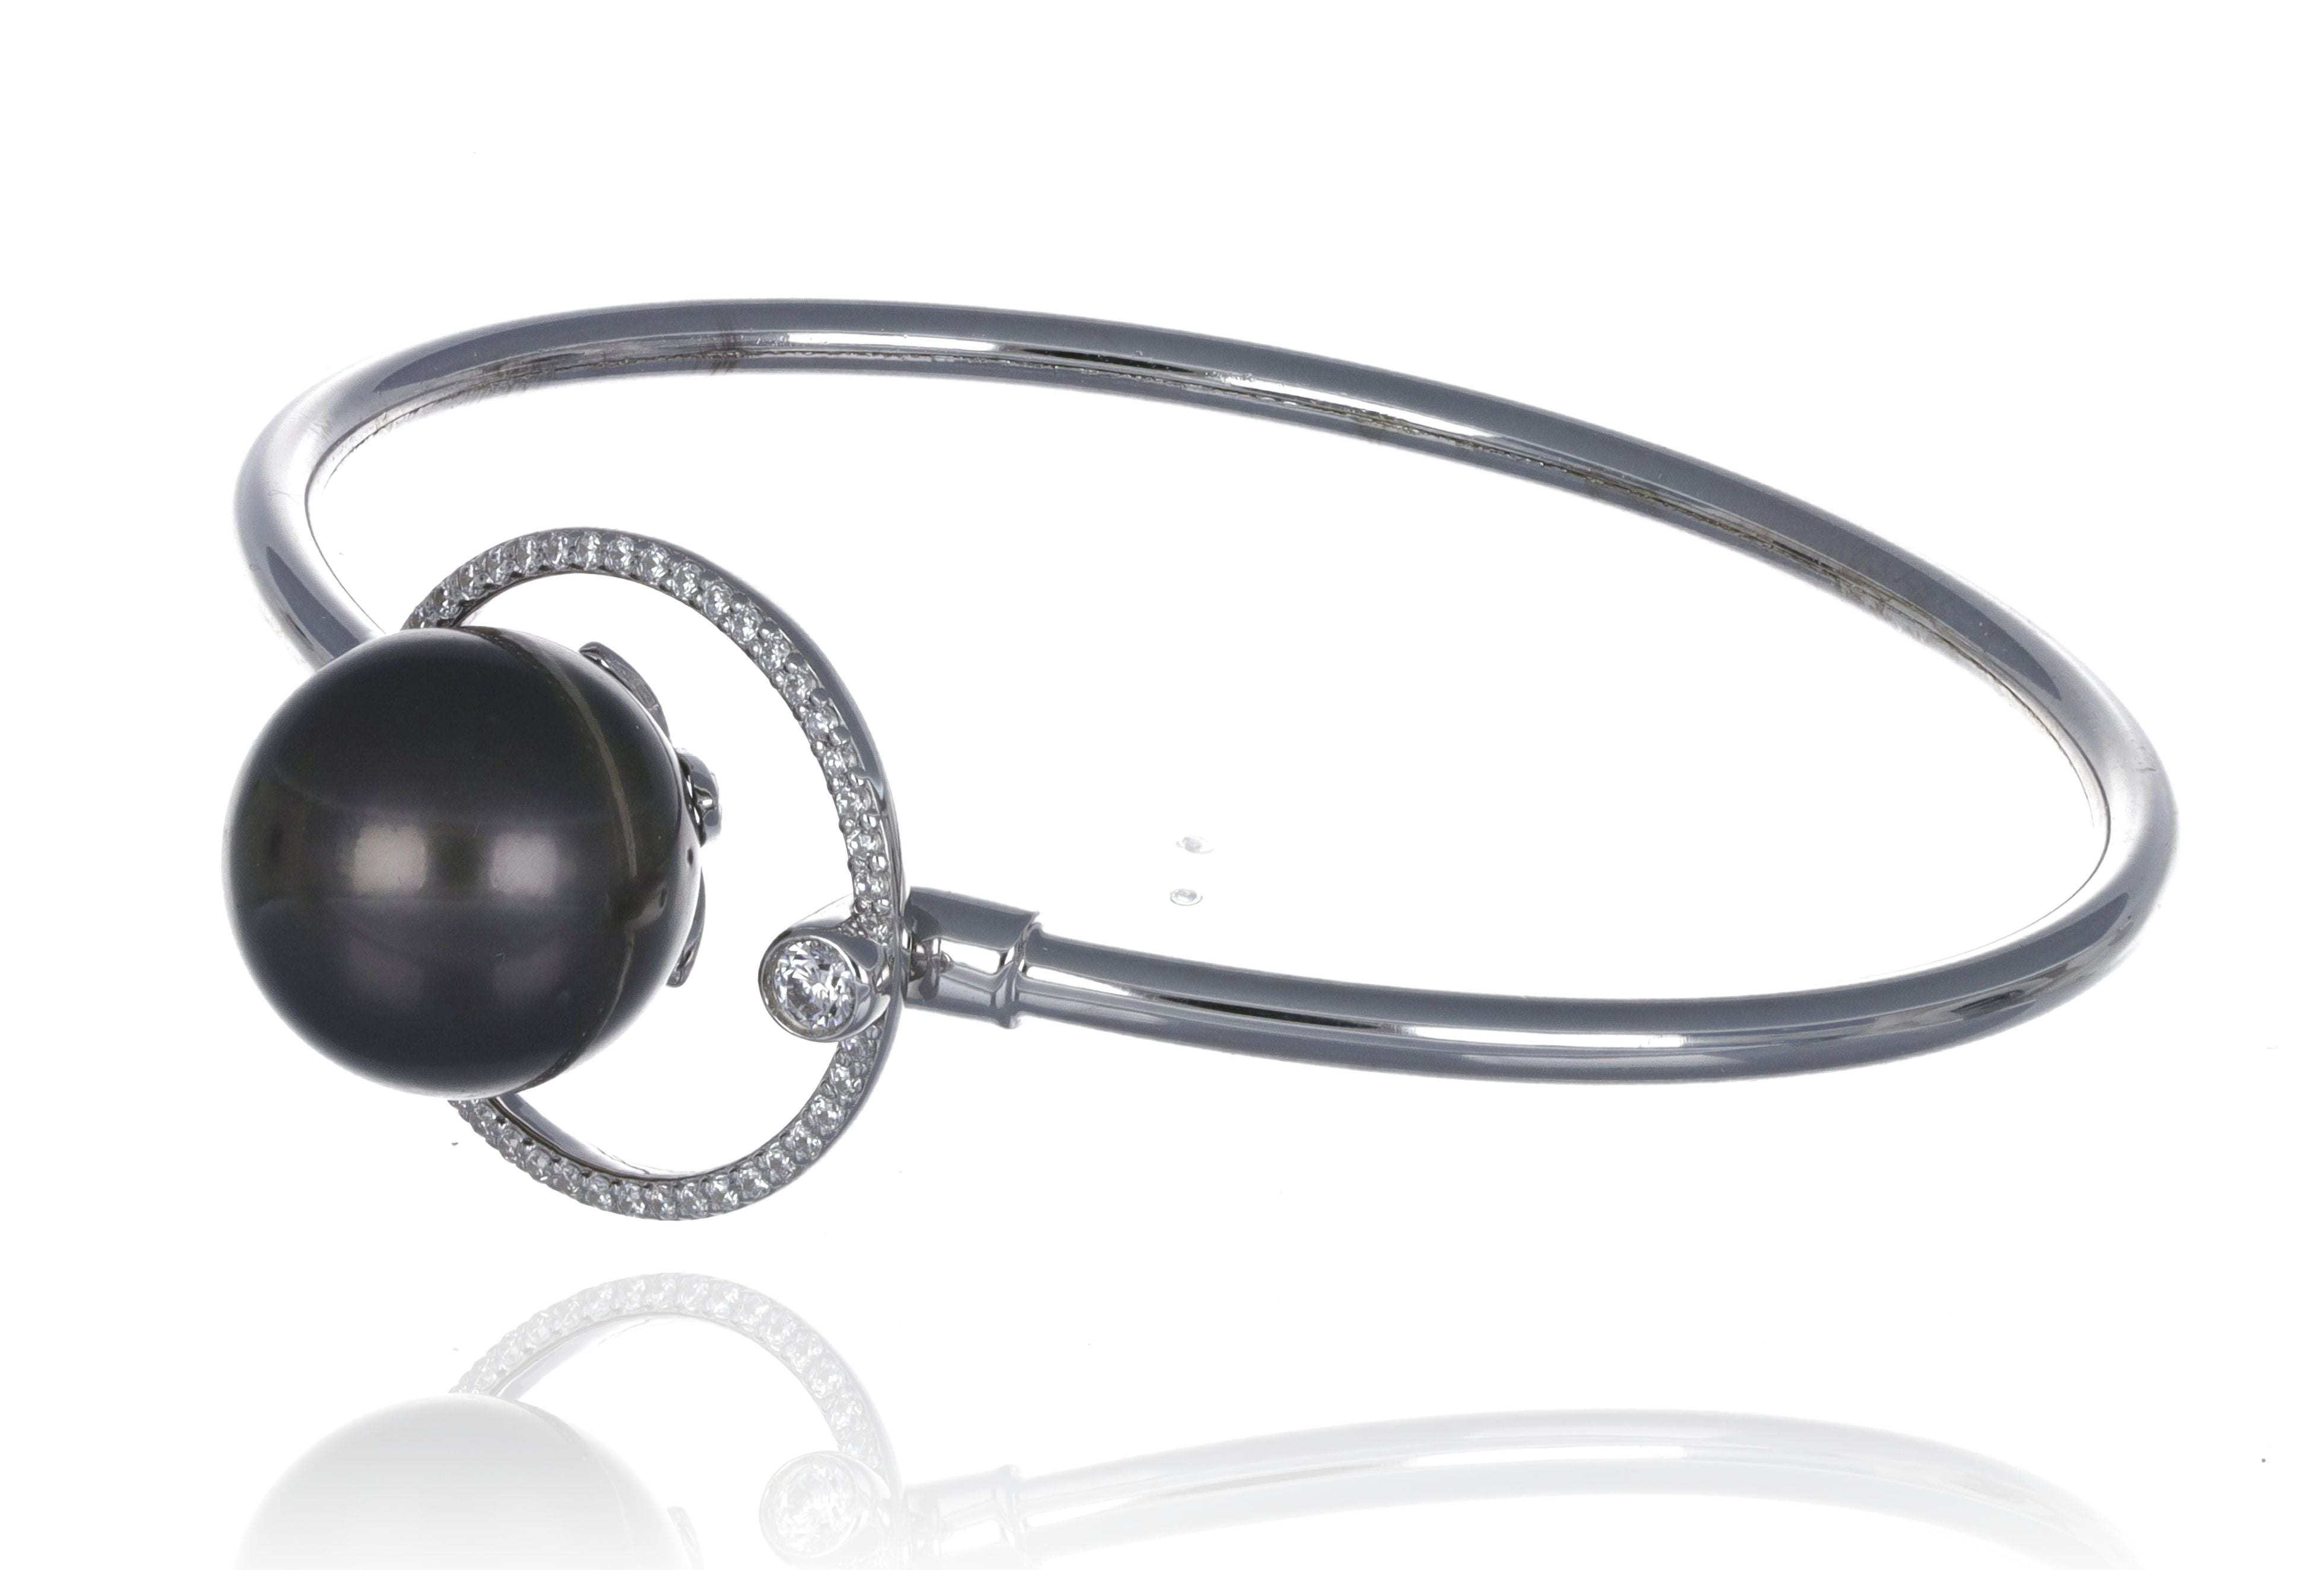 13mm tahitian pearl bangle bracelet, 925 sterling silver with cubic zirconia, 57mm rhodium plating